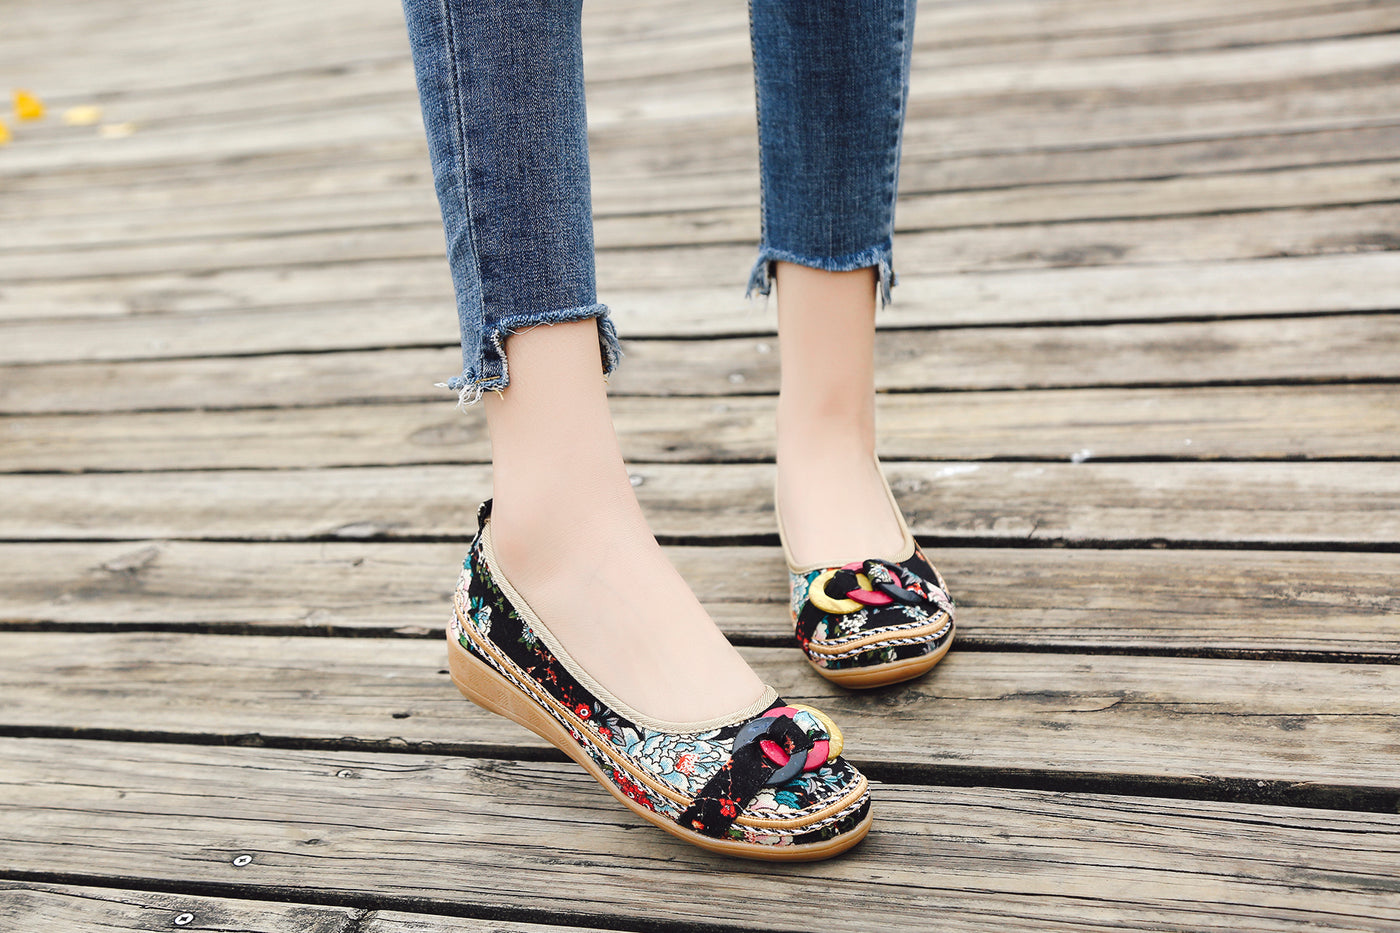 Ring and Trap Head Floral Canvas Sip on Flats - Cactus Rose